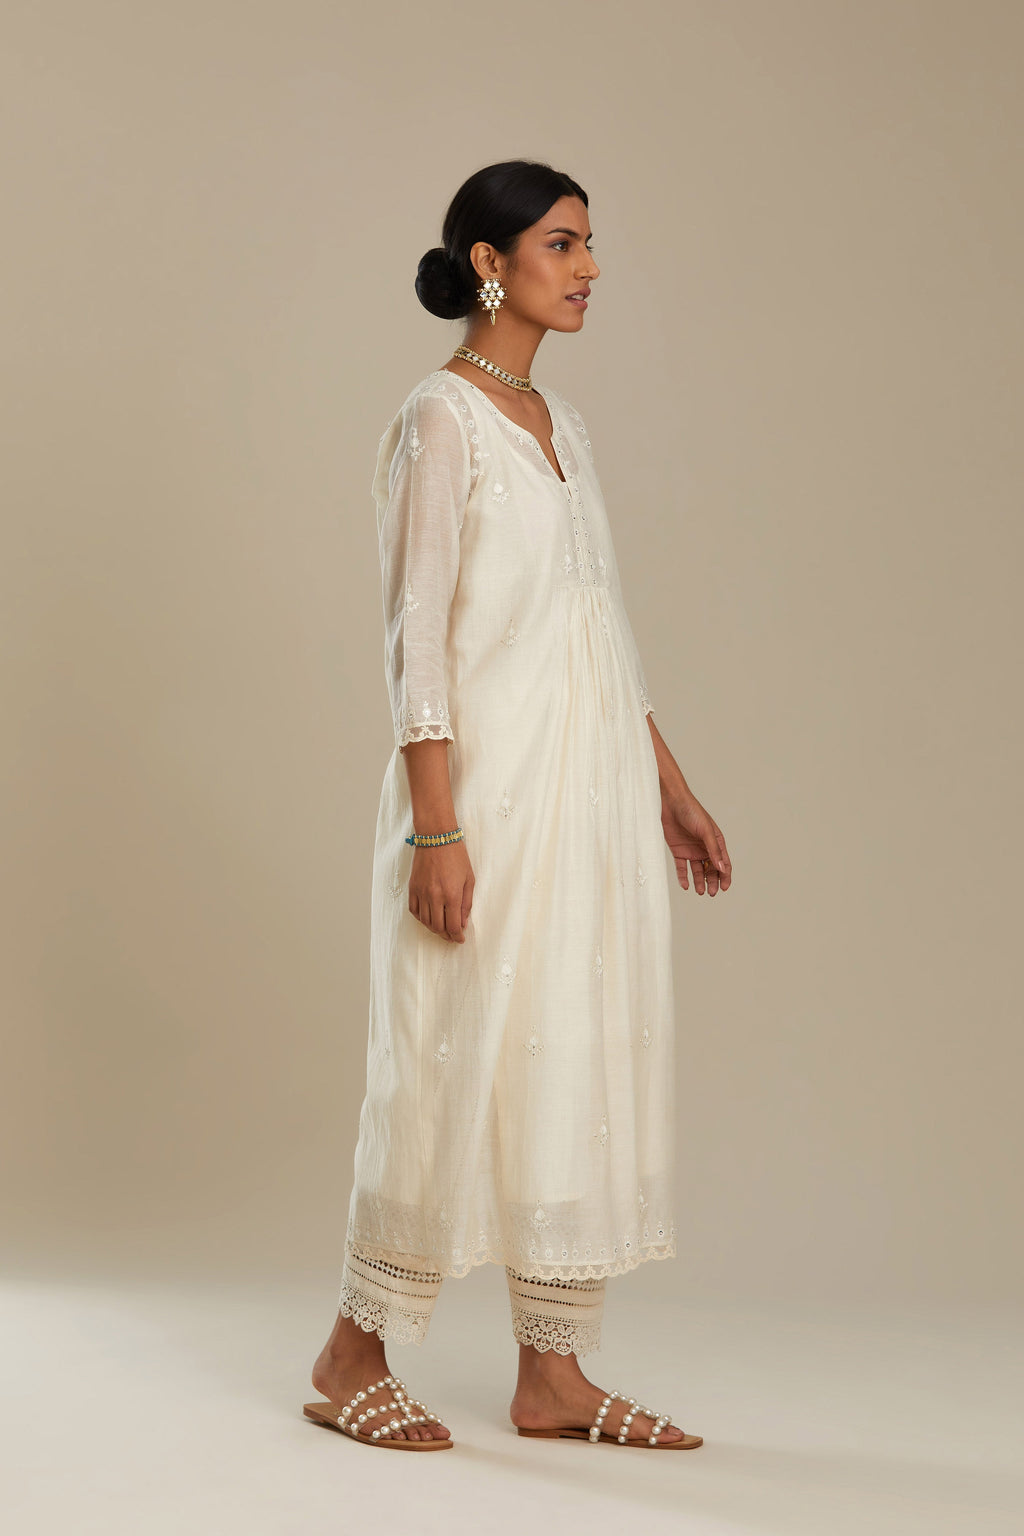 Cotton chanderi Kurta dress set with front gathers and all-over tonal thread embroidery, highlighted with sequins and beads.